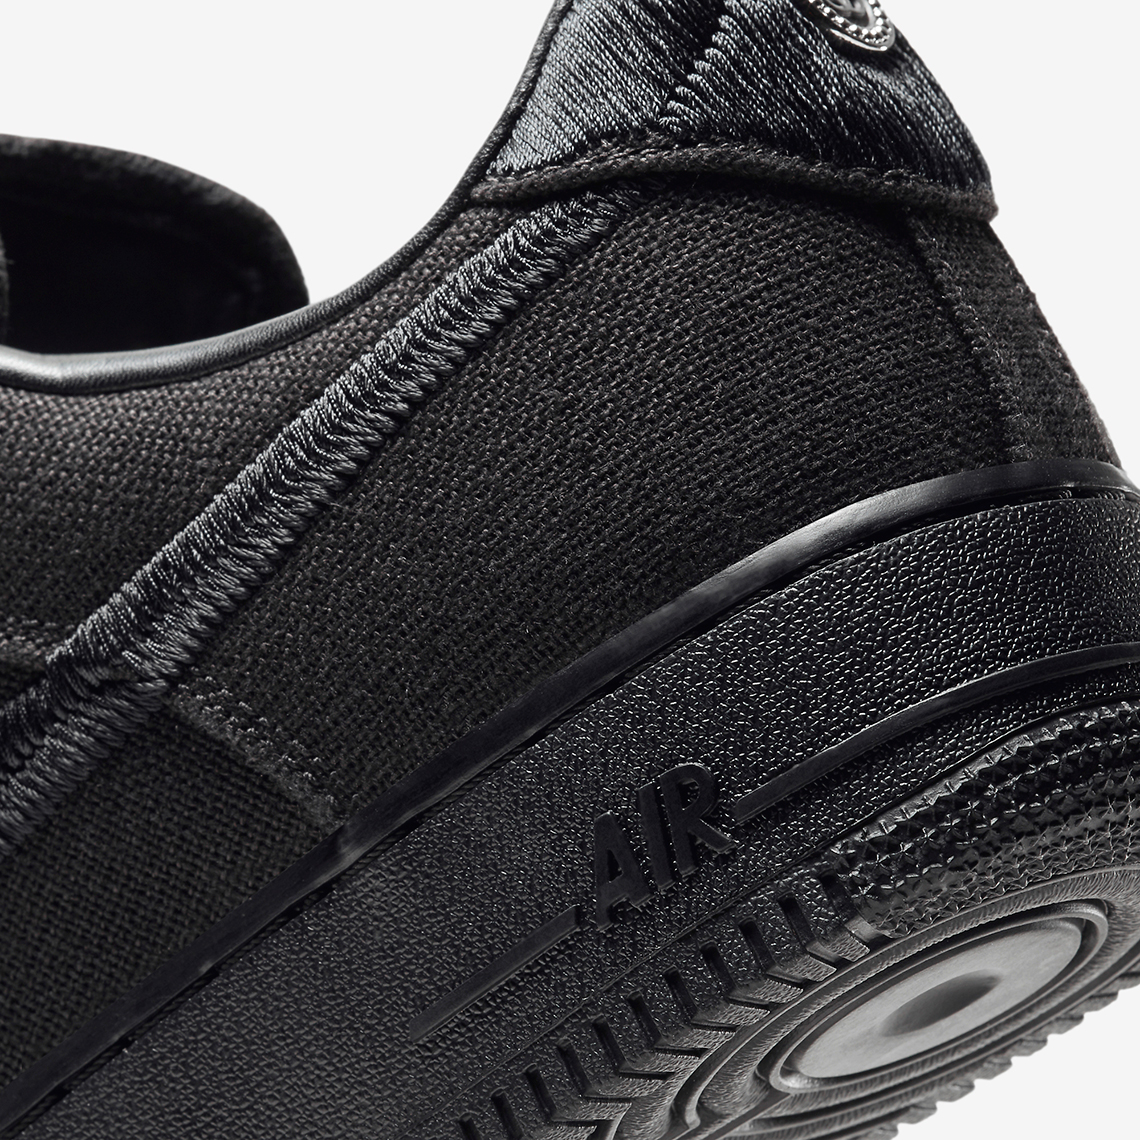 Release Date: Stussy x Nike Air Force 1 Low Collection •